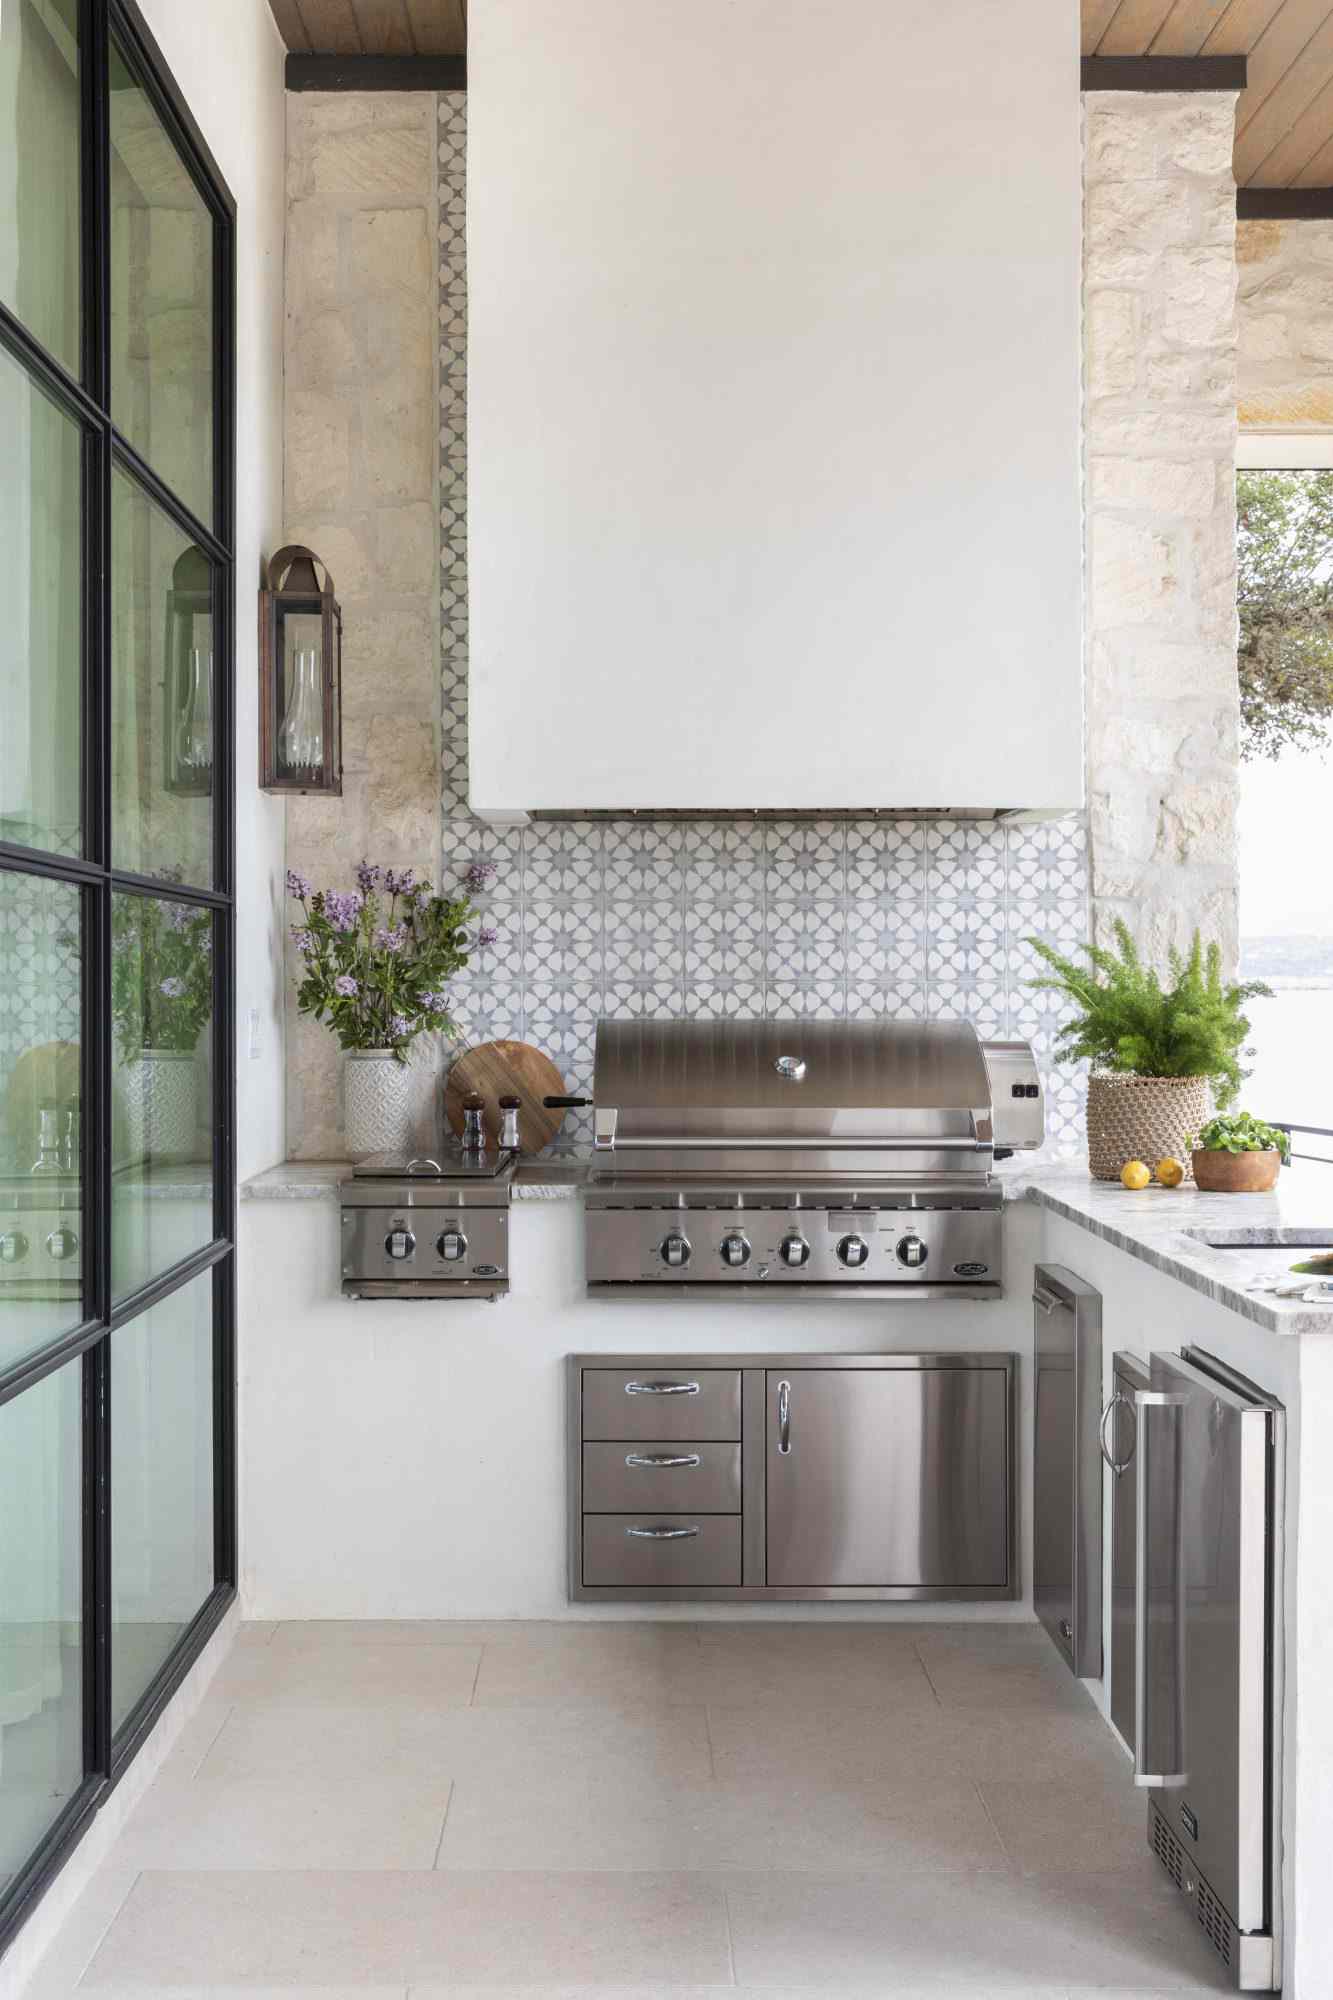 Give Your Space the Tiled Treatment